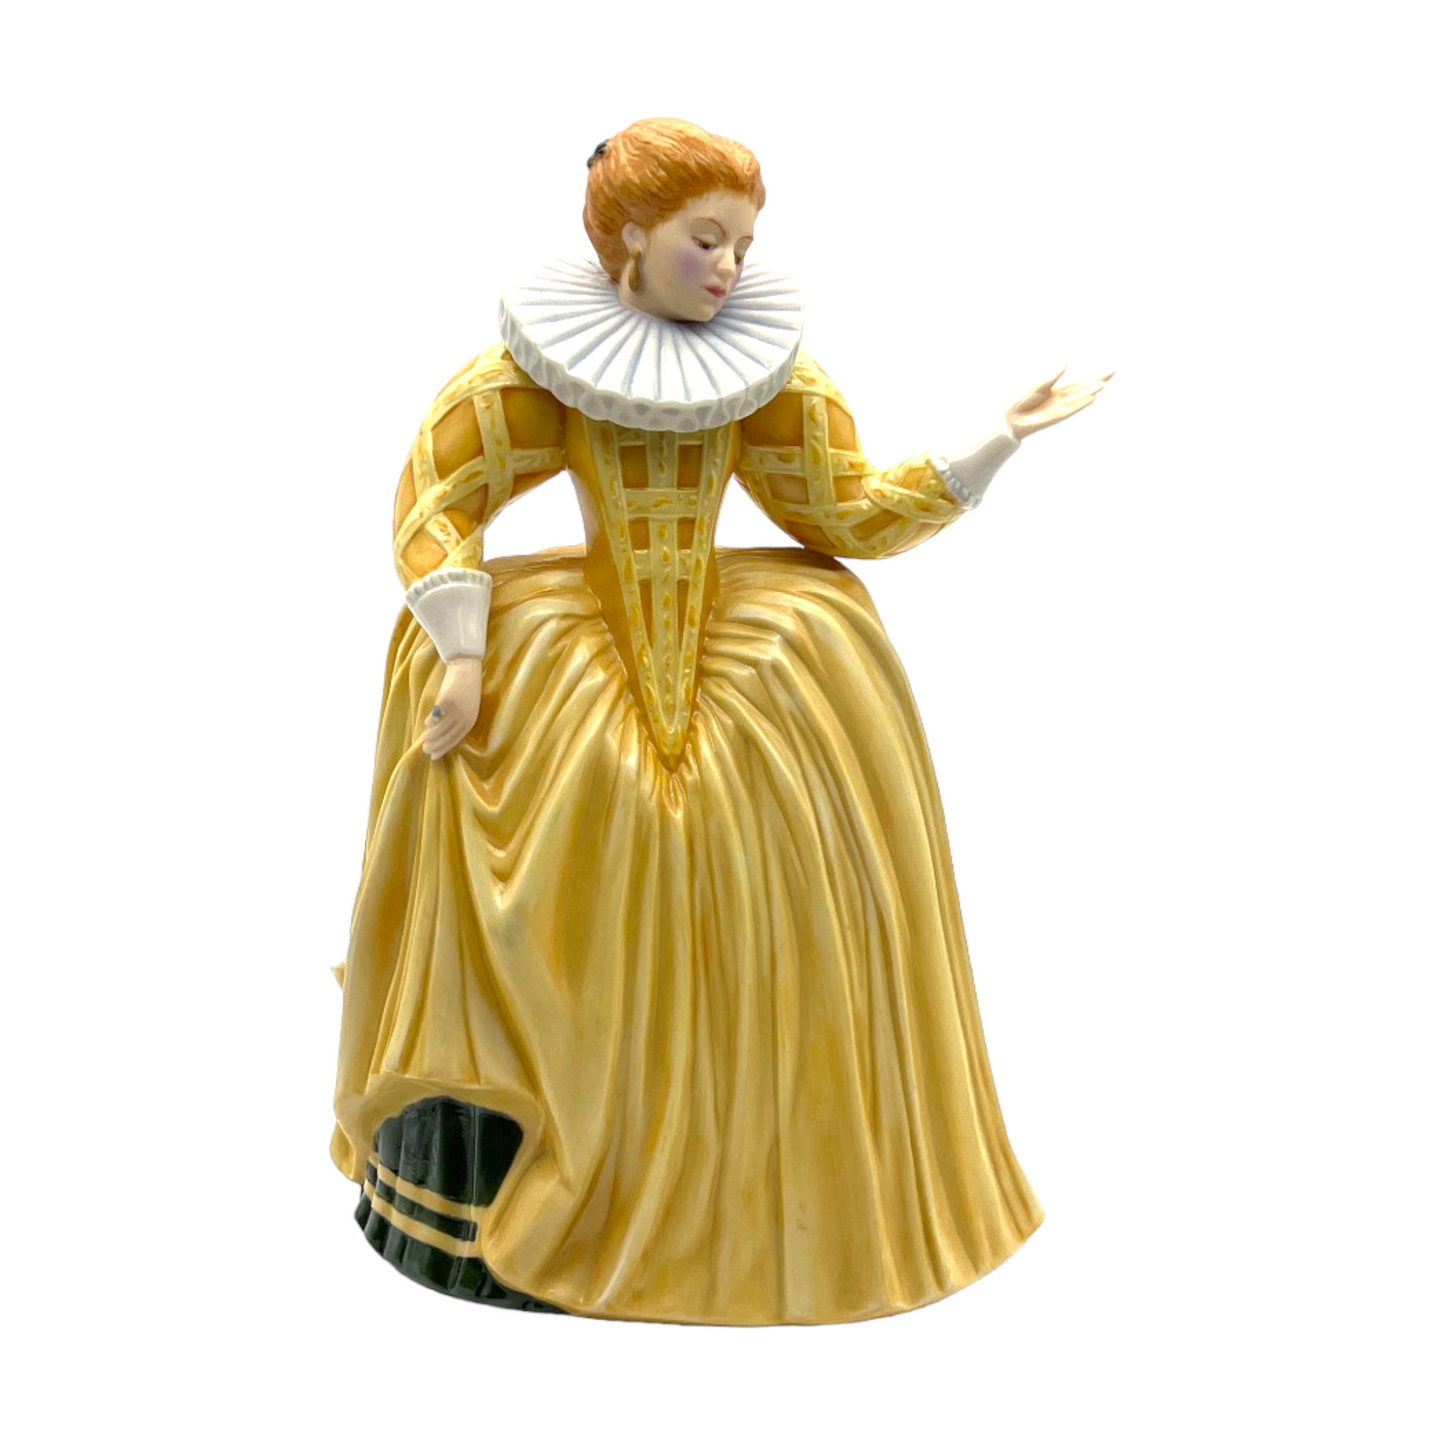 Franklin Porcelain - Katherine "The Galliard" - Hand Painted - 1983 - 9"